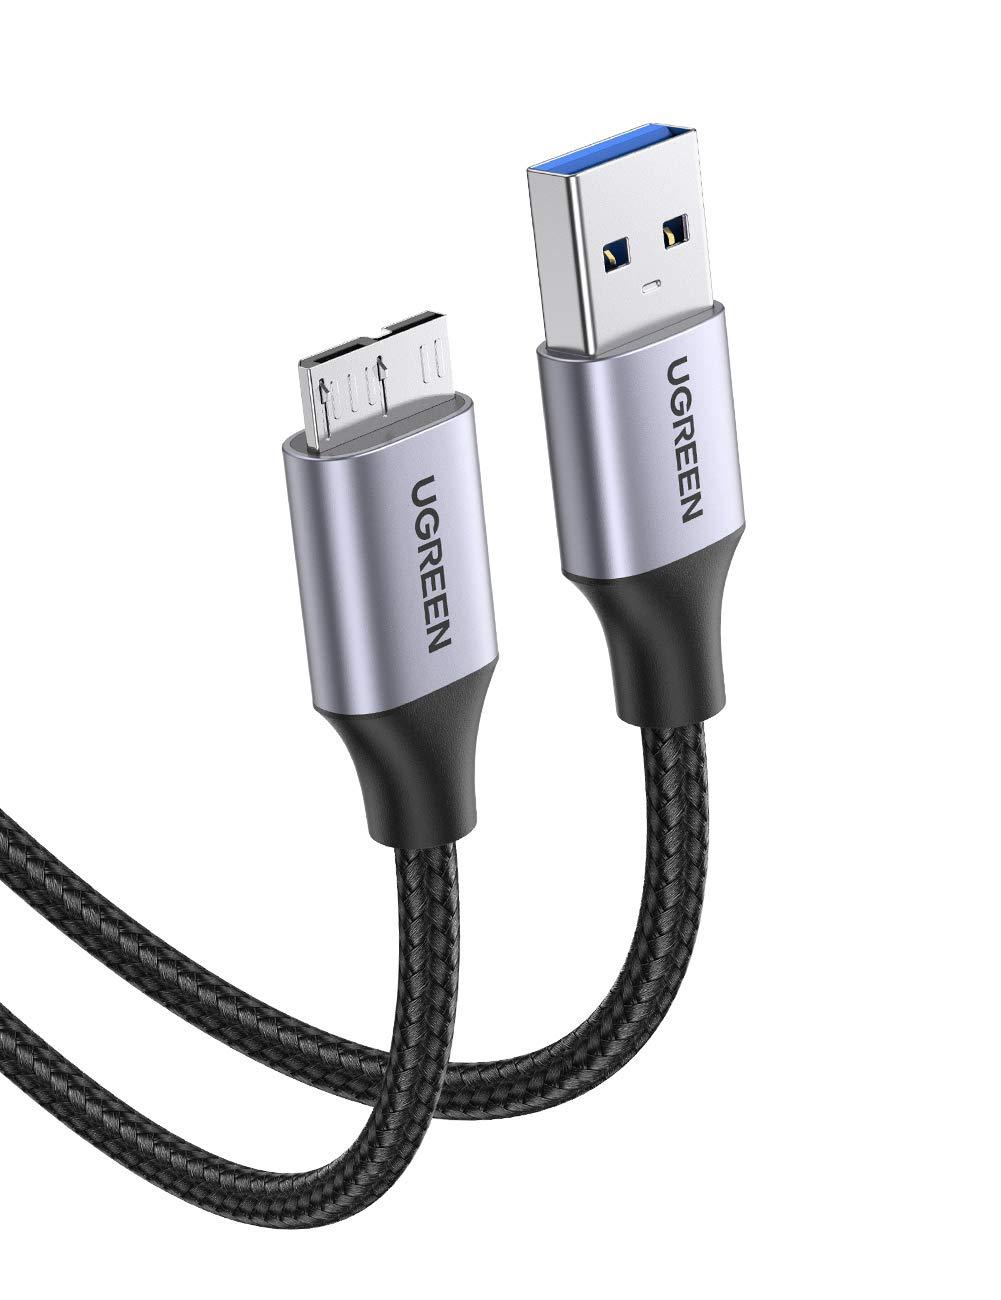 UGREEN USB 3.0 Micro Cable A-Male to Micro-B Micro USB Charging Cable Nylon Braided External Hard Drive Cable Compatible with Samsung Galaxy S5, Note 3, Note Pro 12.2, Toshiba, WD Camera, etc 3FT 3.3 ft - LeoForward Australia